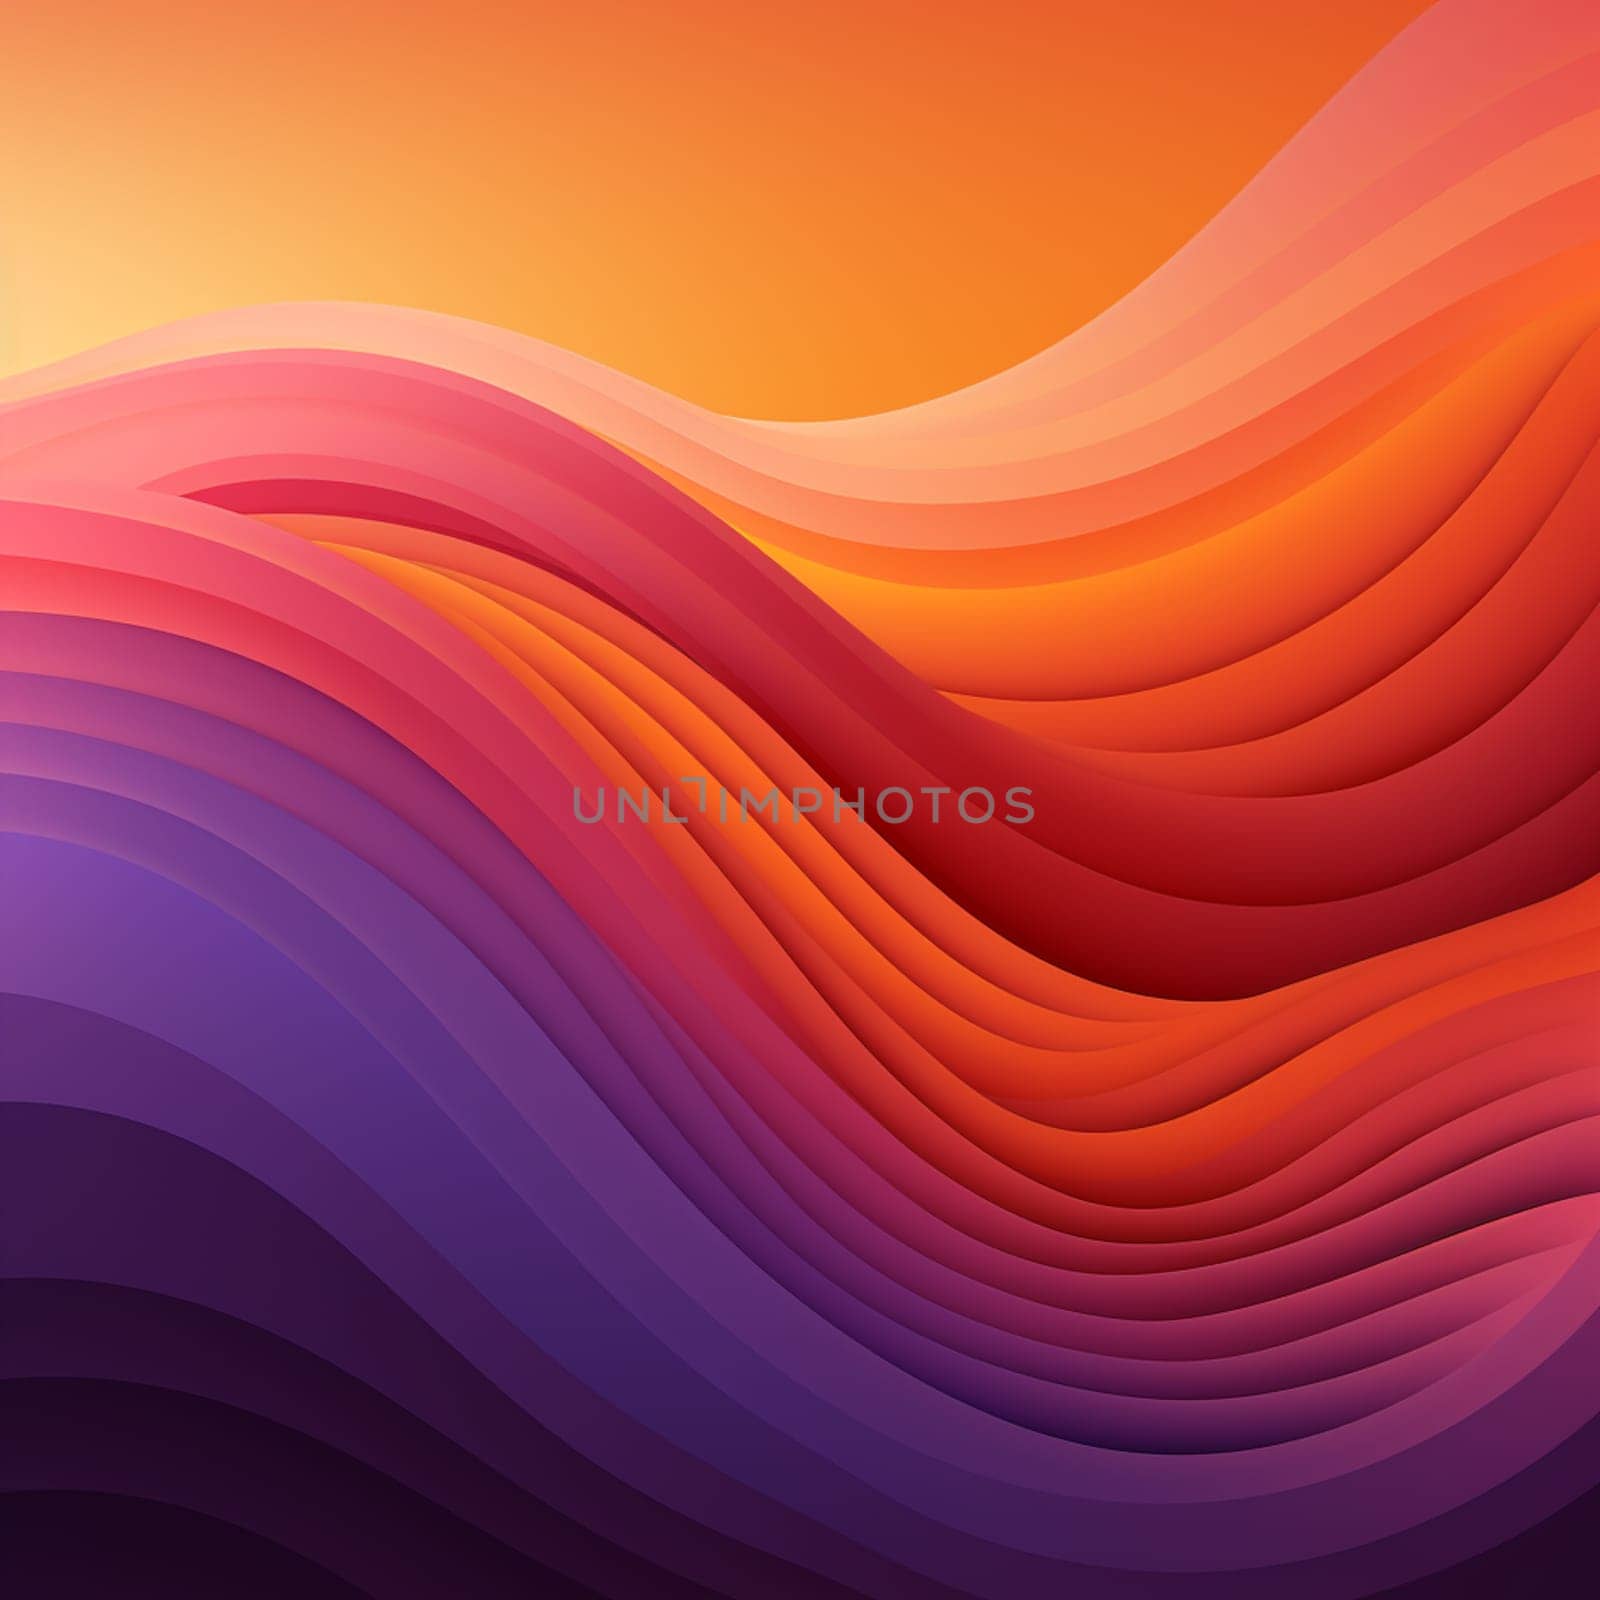 Artistic and classic 3D abstract background of colorful flowing liquid or wave patterns with vignette effect. Art painting of wave pattern. Retro and vintage design. by Andelov13